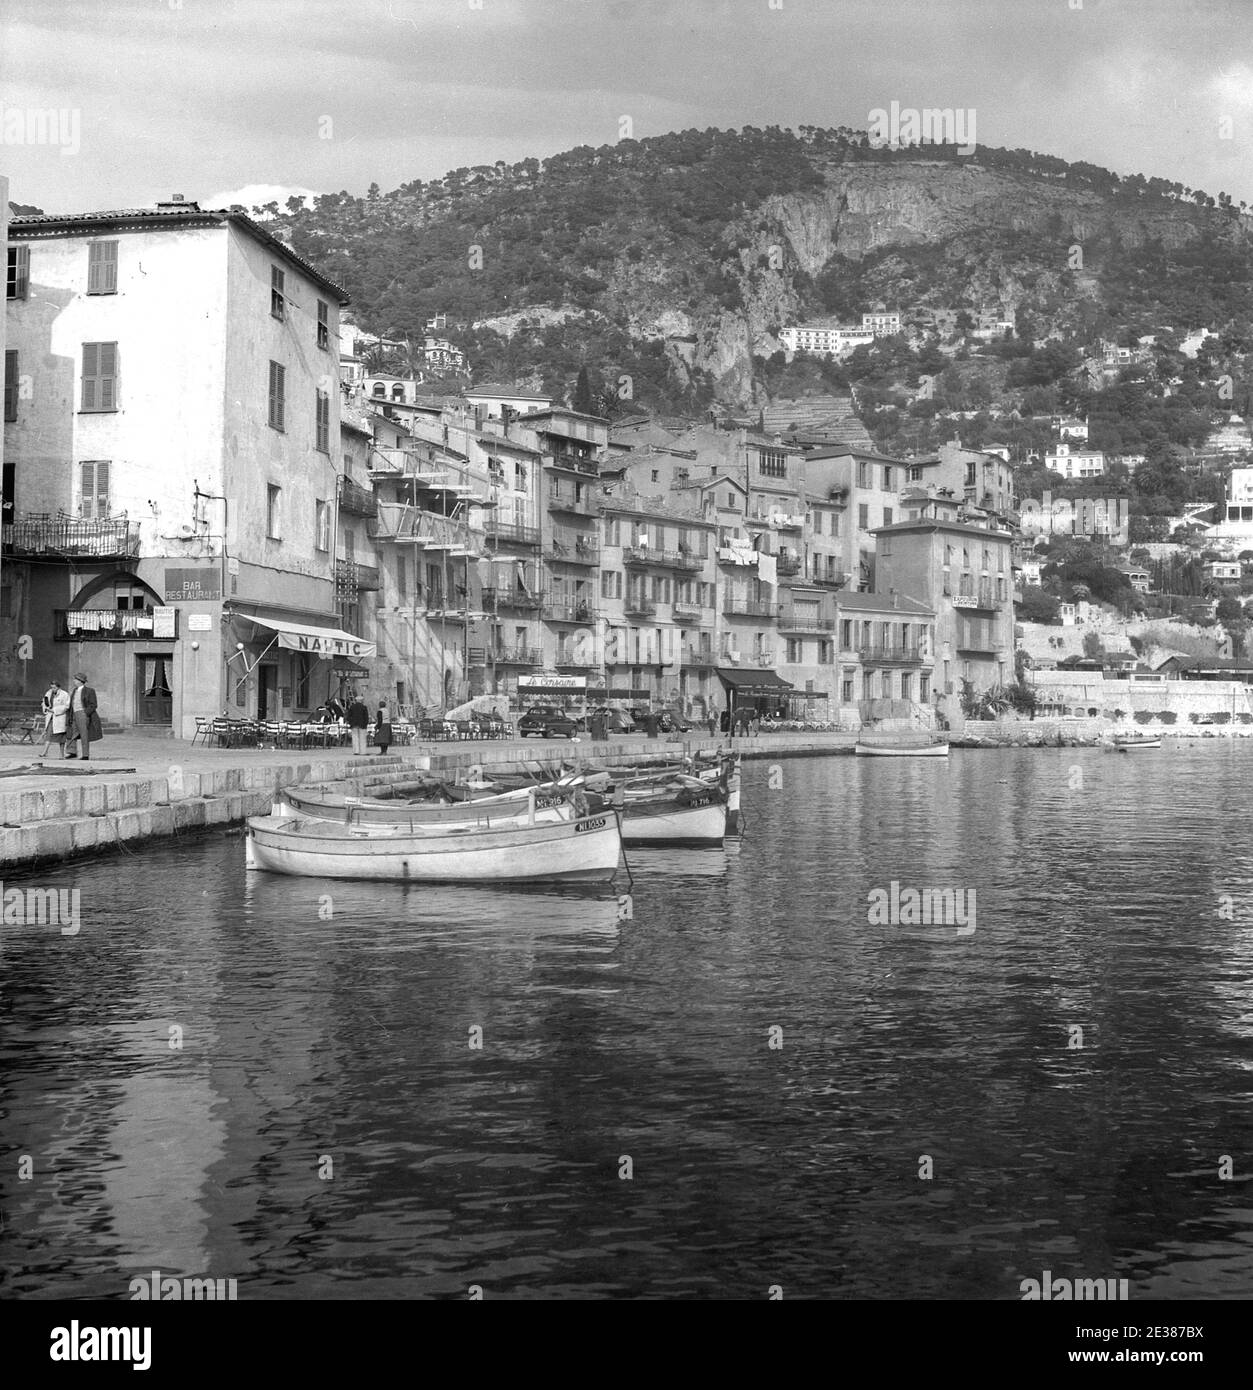 1950s, historical, a view of the pretty coastal village, Villefranche-sur-Mer in the South of France in this era. A picturesque old town located in the Alpes-Cote d'Azur region on the French Riviera, Villefranche is considered one of the most beautiful bays in the world and surrounded by the Cap of Nice and Cap Ferrat. Seen in the picture is the bar/restuarnant, Nautic and enclosed harbour. Stock Photo